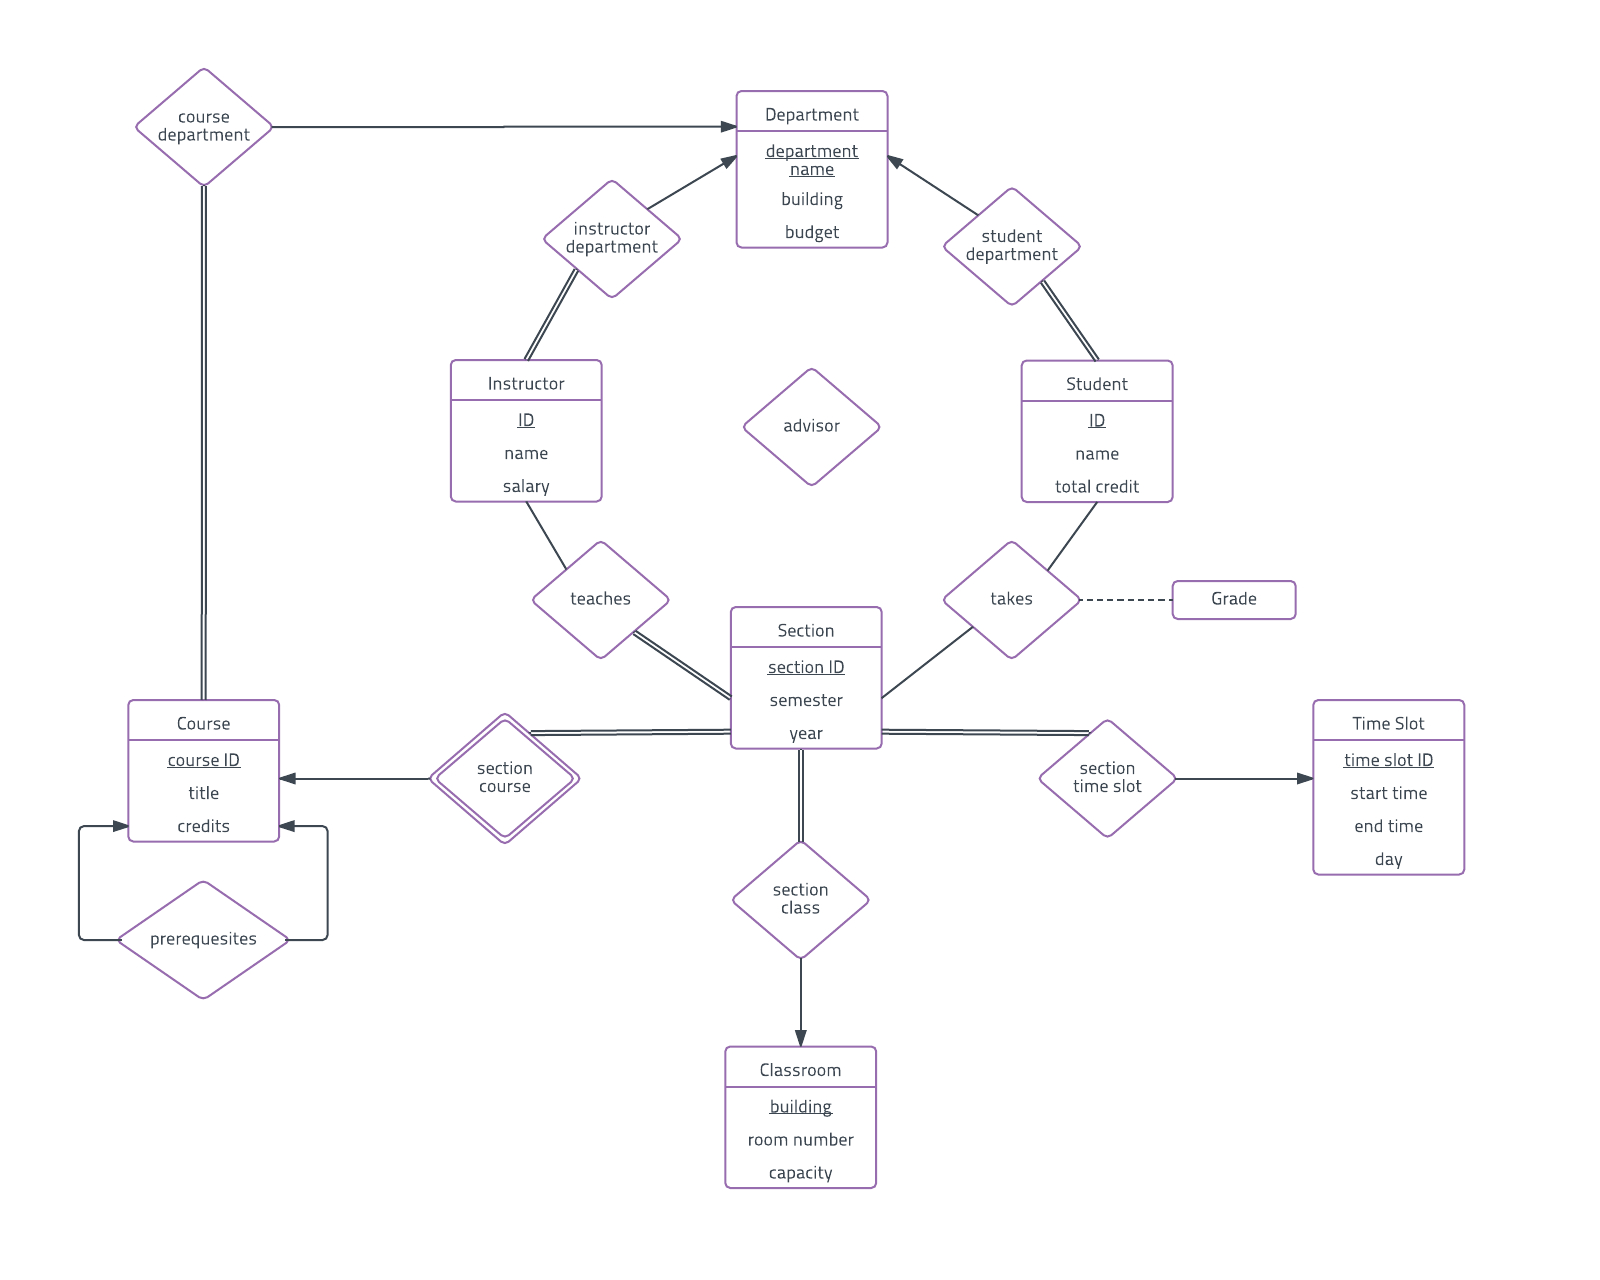 Er Diagram Examples And Templates | Lucidchart intended for Er Diagram Examples For University